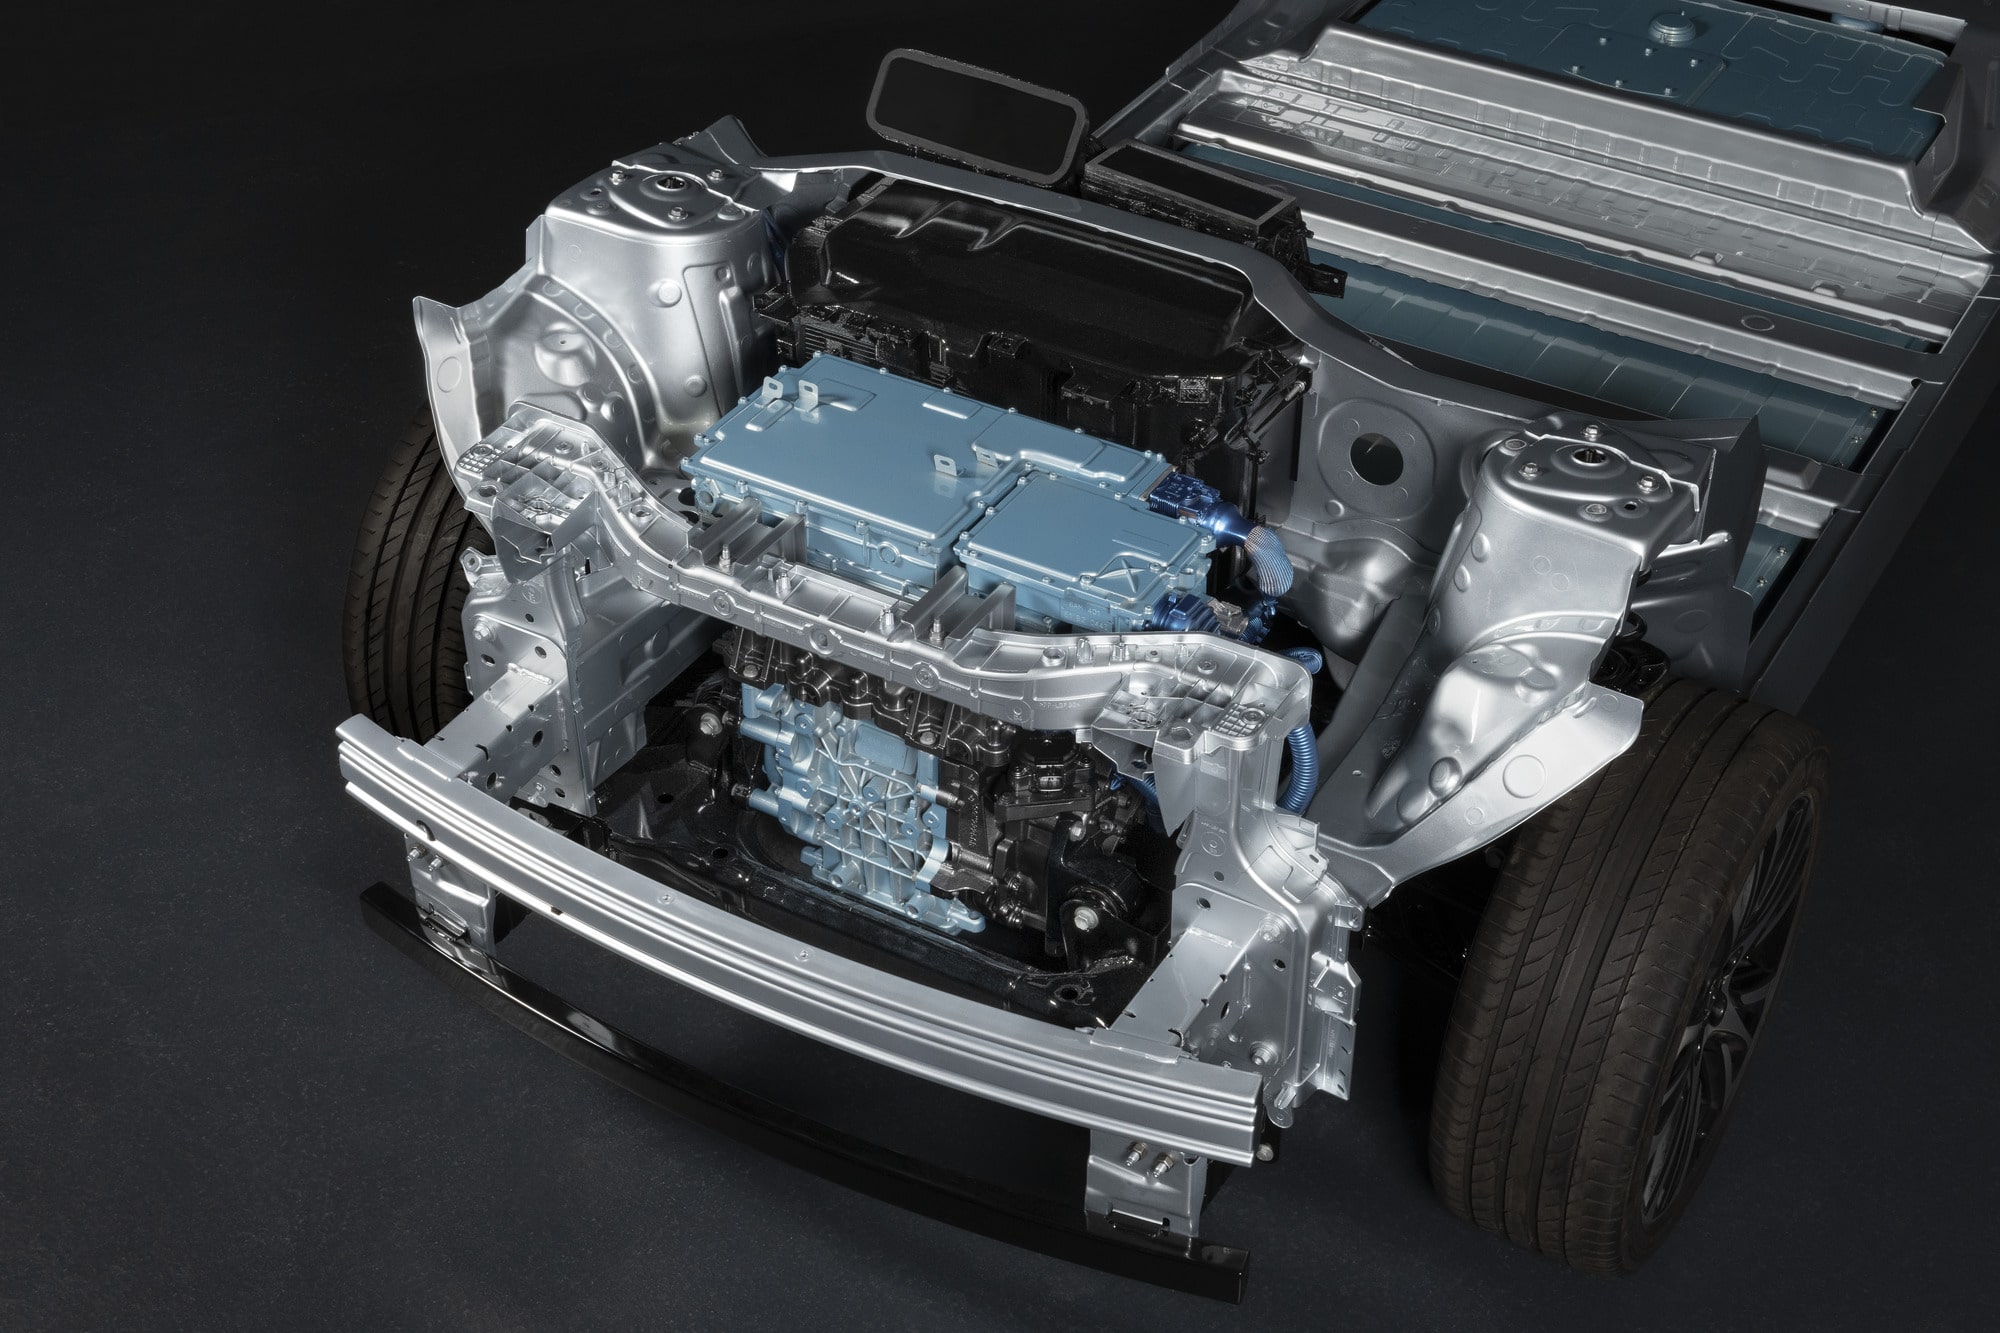 Learn all about electric vehicle maintenance to expand knowledge